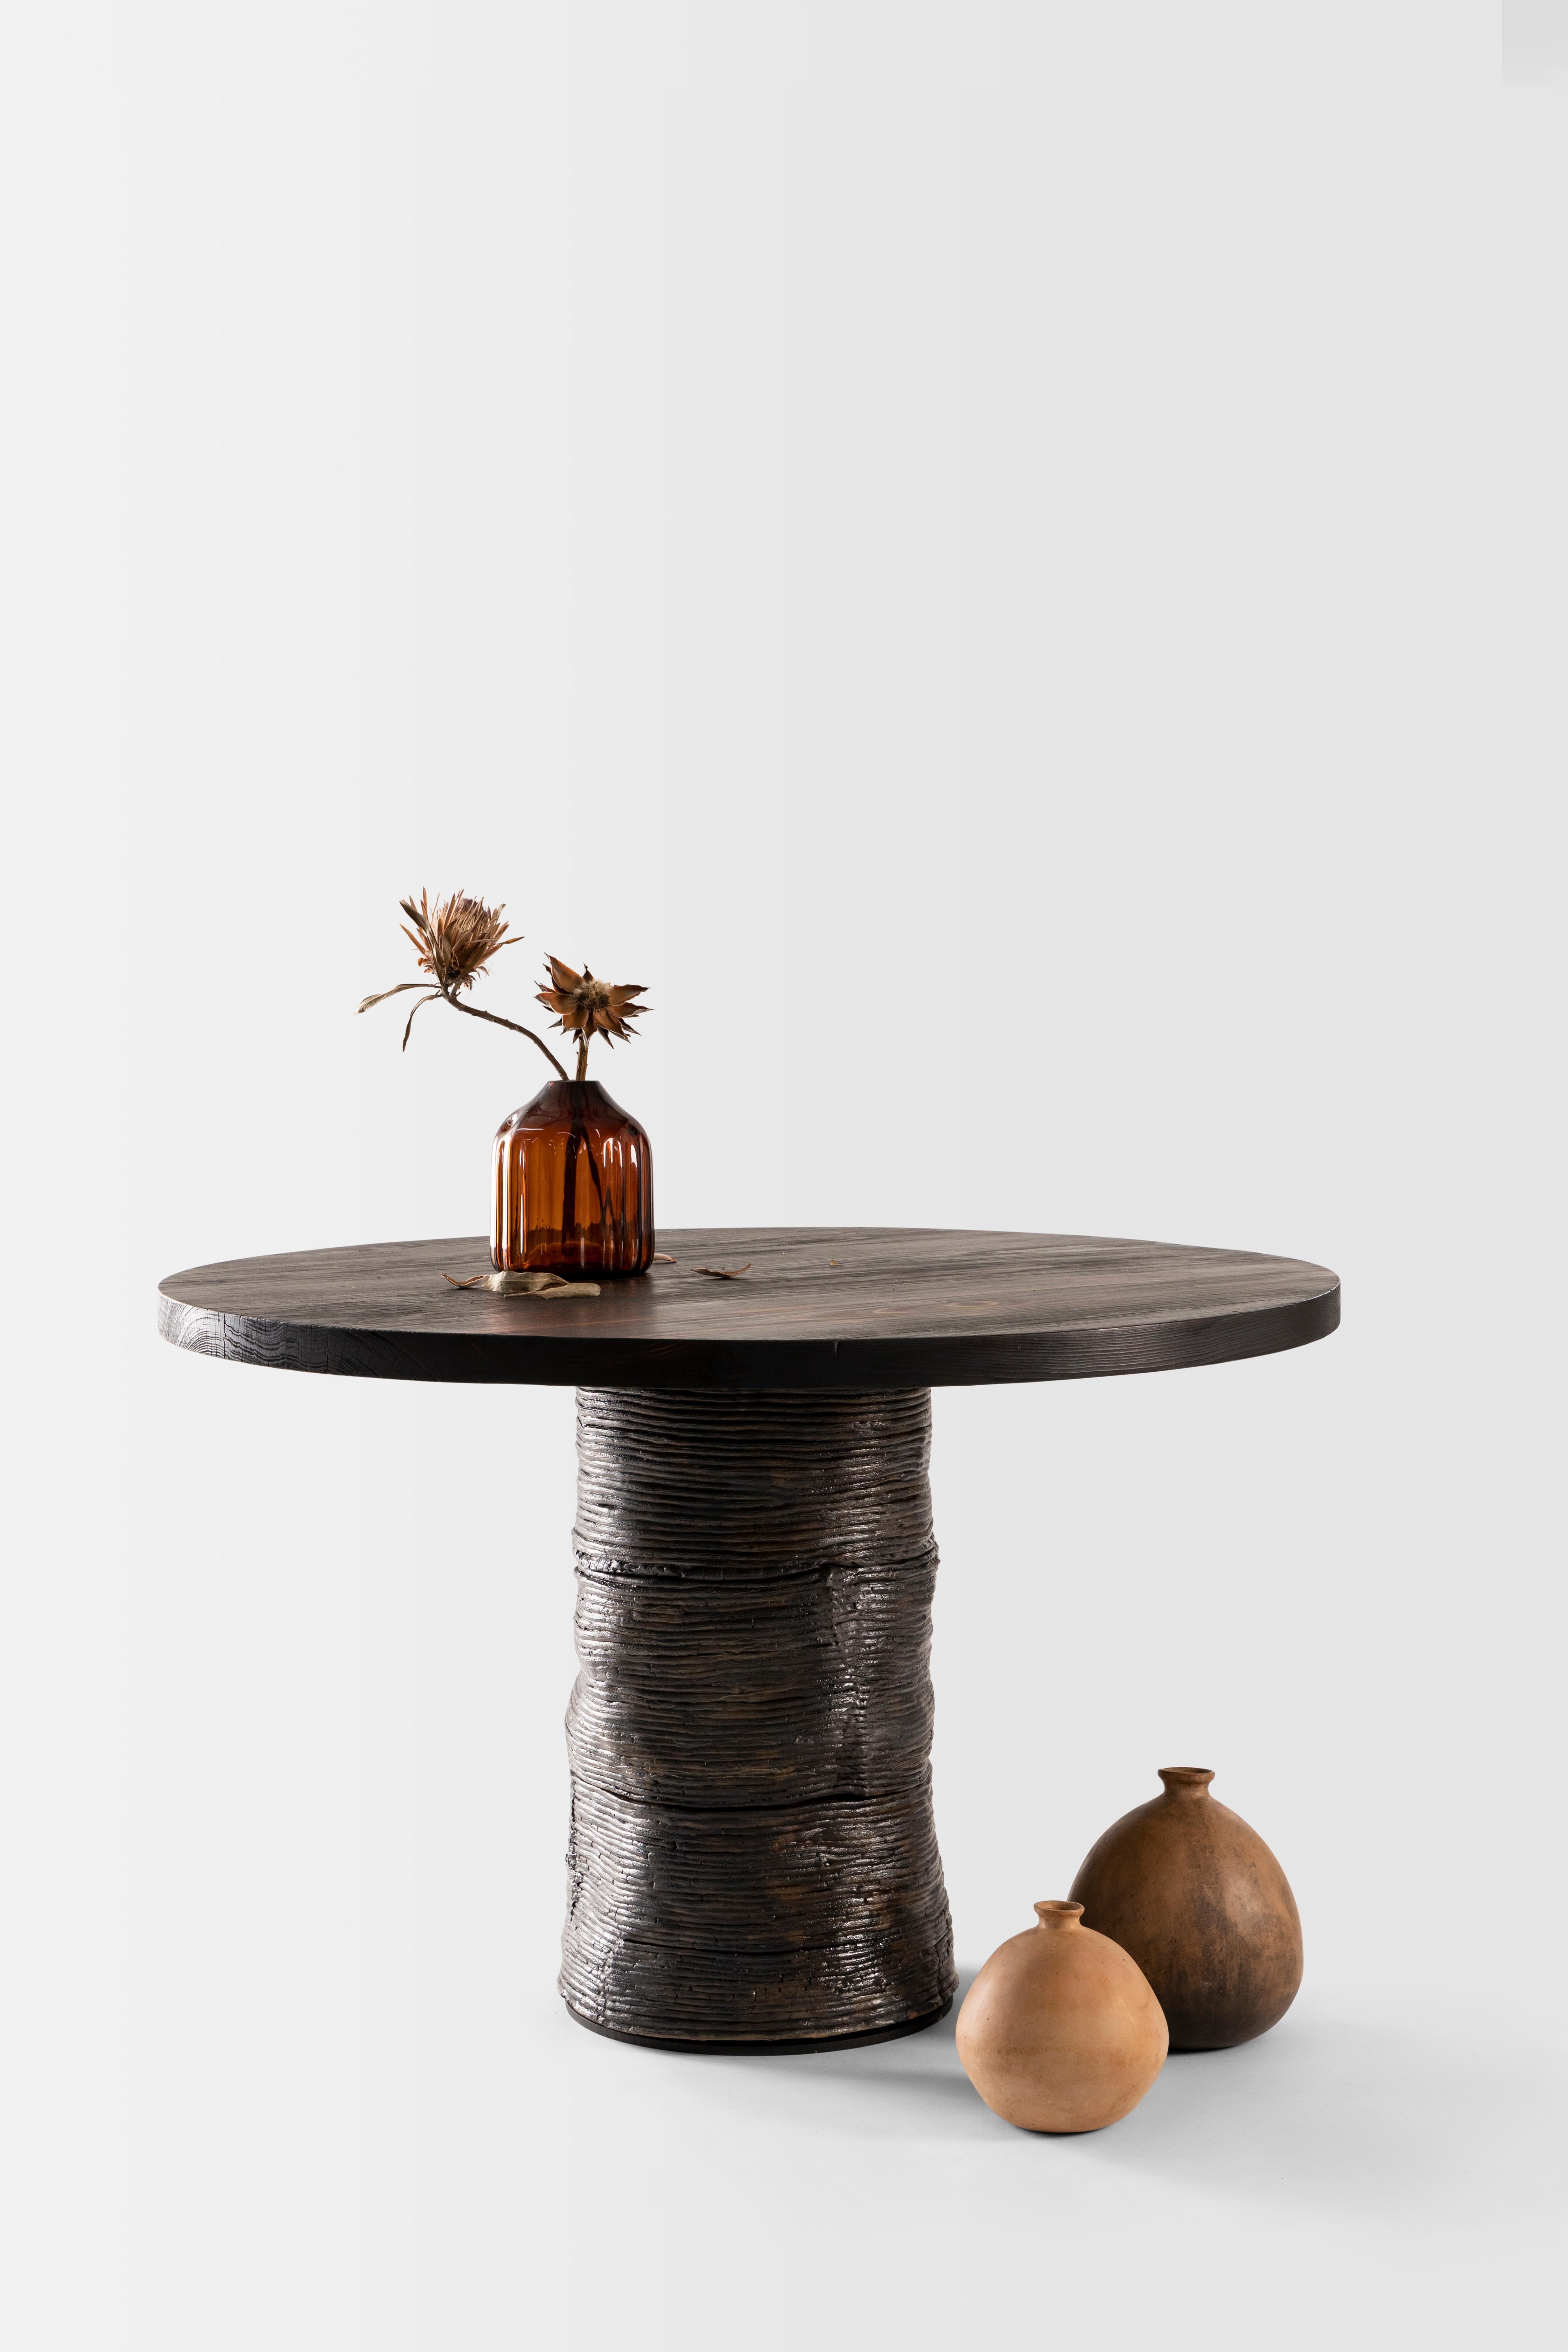 An homage to nature’s infinite cycles, the Lazo table contrasts a fired wood top and copperdusted terracotta coil sculpted base in a conversation piece in
its purest form. The name Lazo, meaning bond in Spanish, manifests in an interaction of those